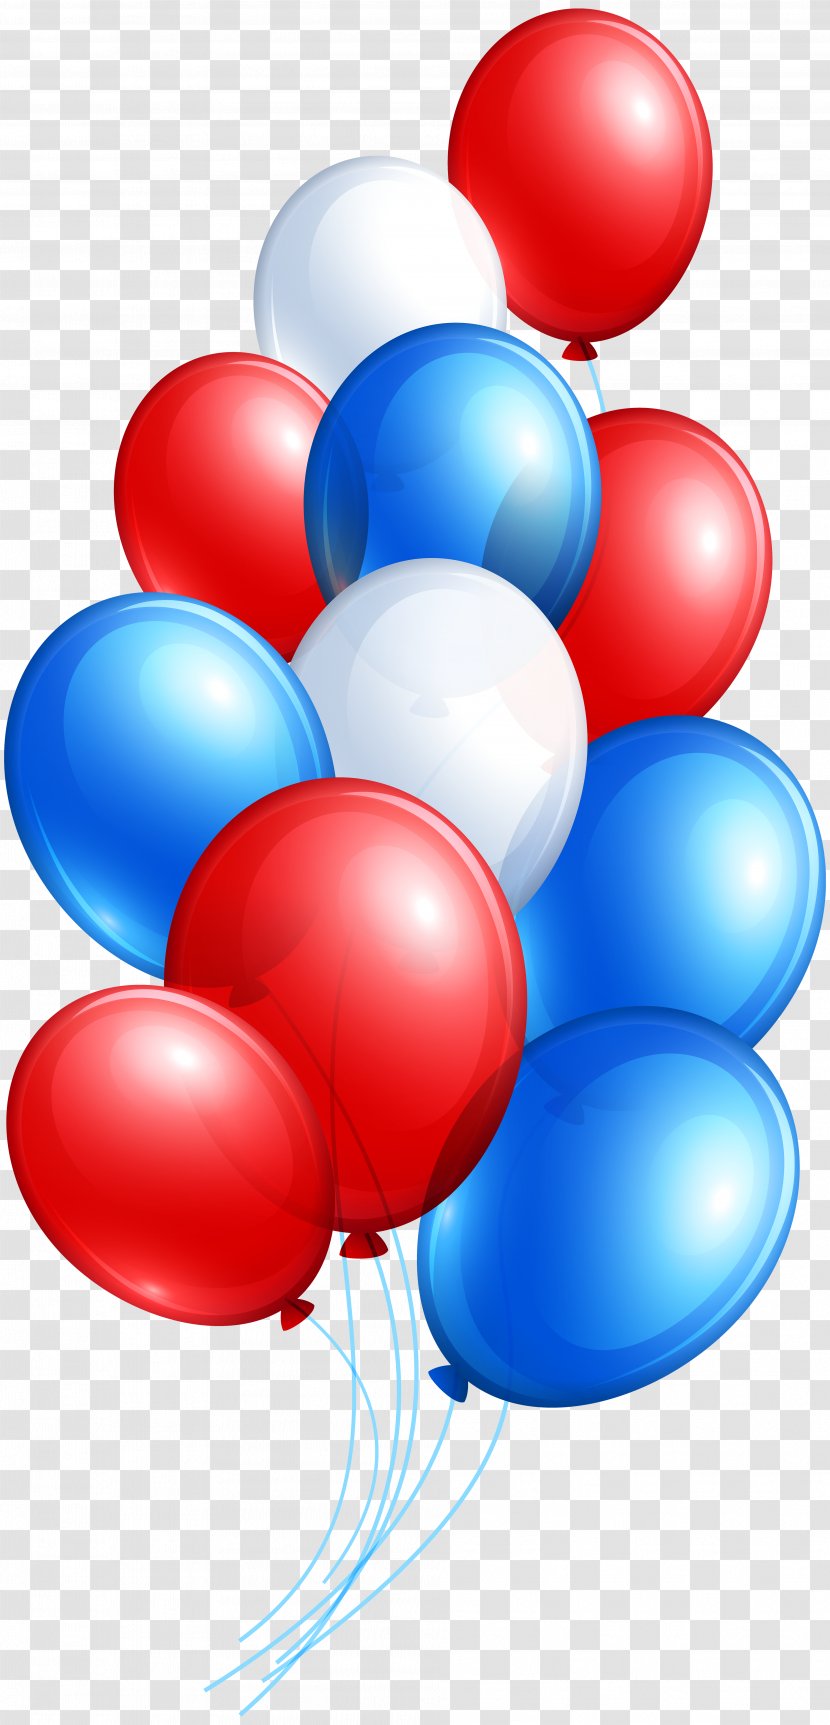 Independence Day Symbol Clip Art - Royalty Free - 4th July Balloon Bunch Image Transparent PNG